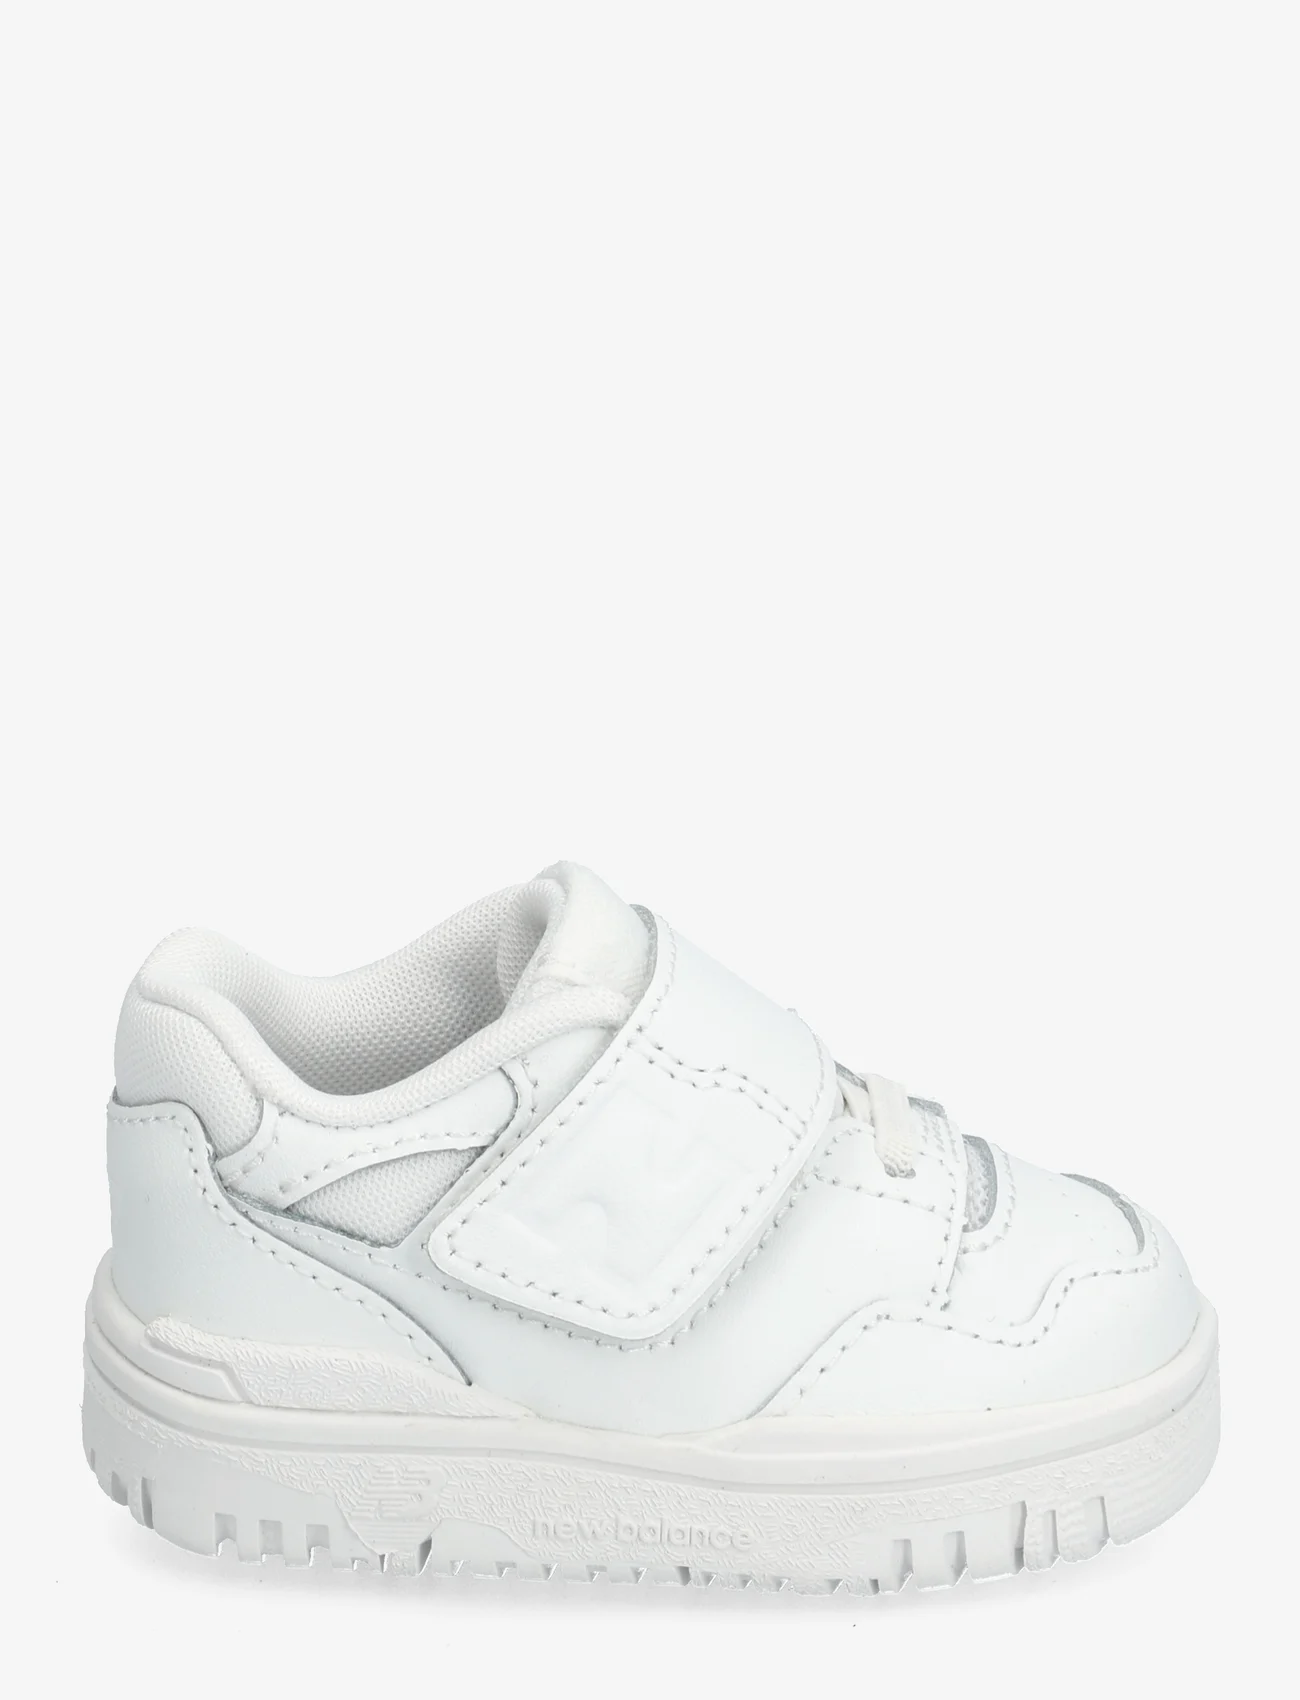 New Balance - New Balance 550 Kids Bungee Lace with Hook & Loop Top Strap - kinder - white - 1